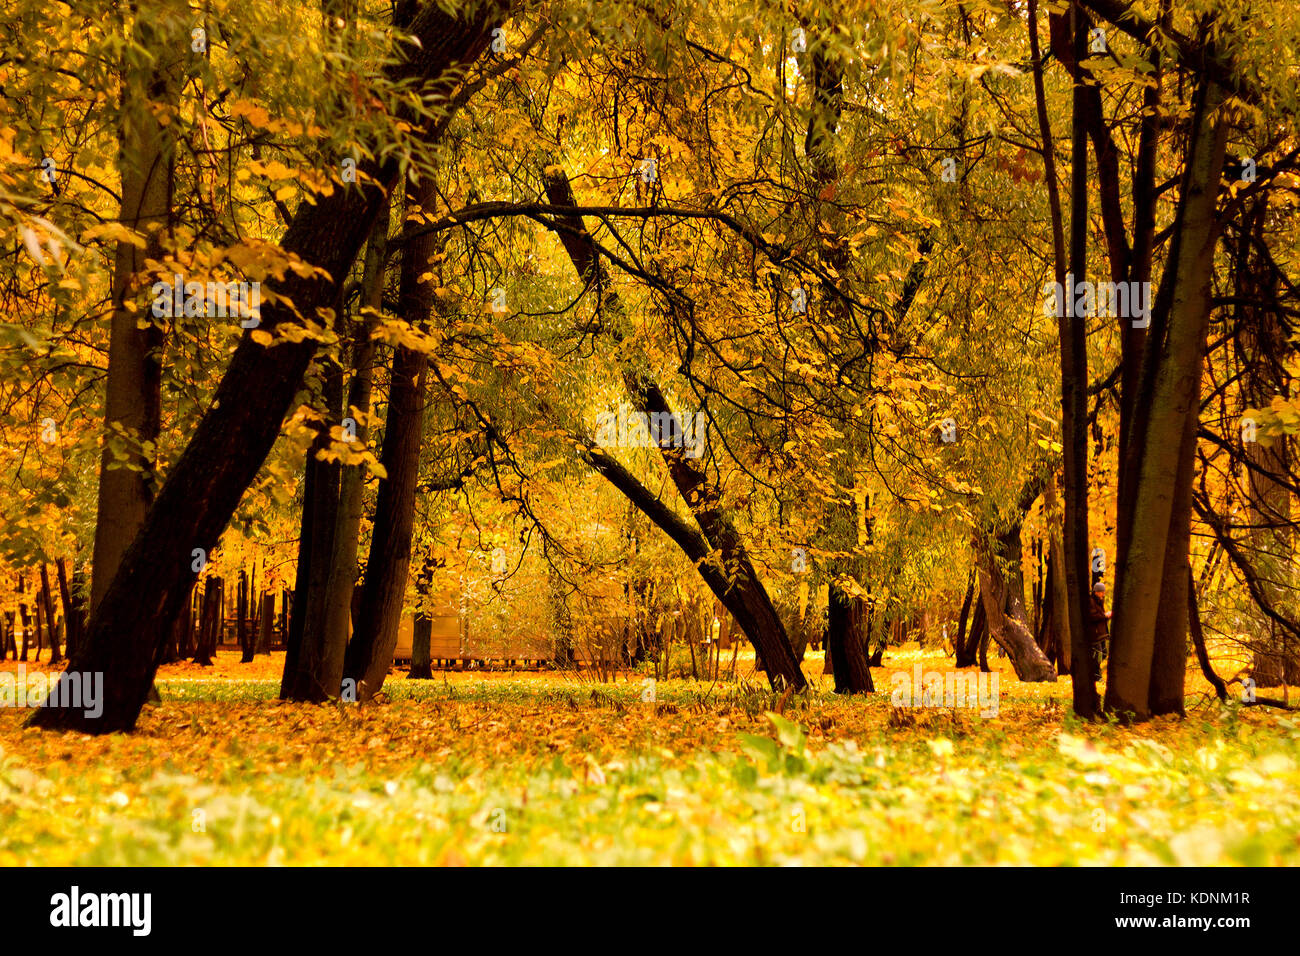 Trees in a park by an autumn day with yellow leaves and grass around covered by foliage. Stock Photo